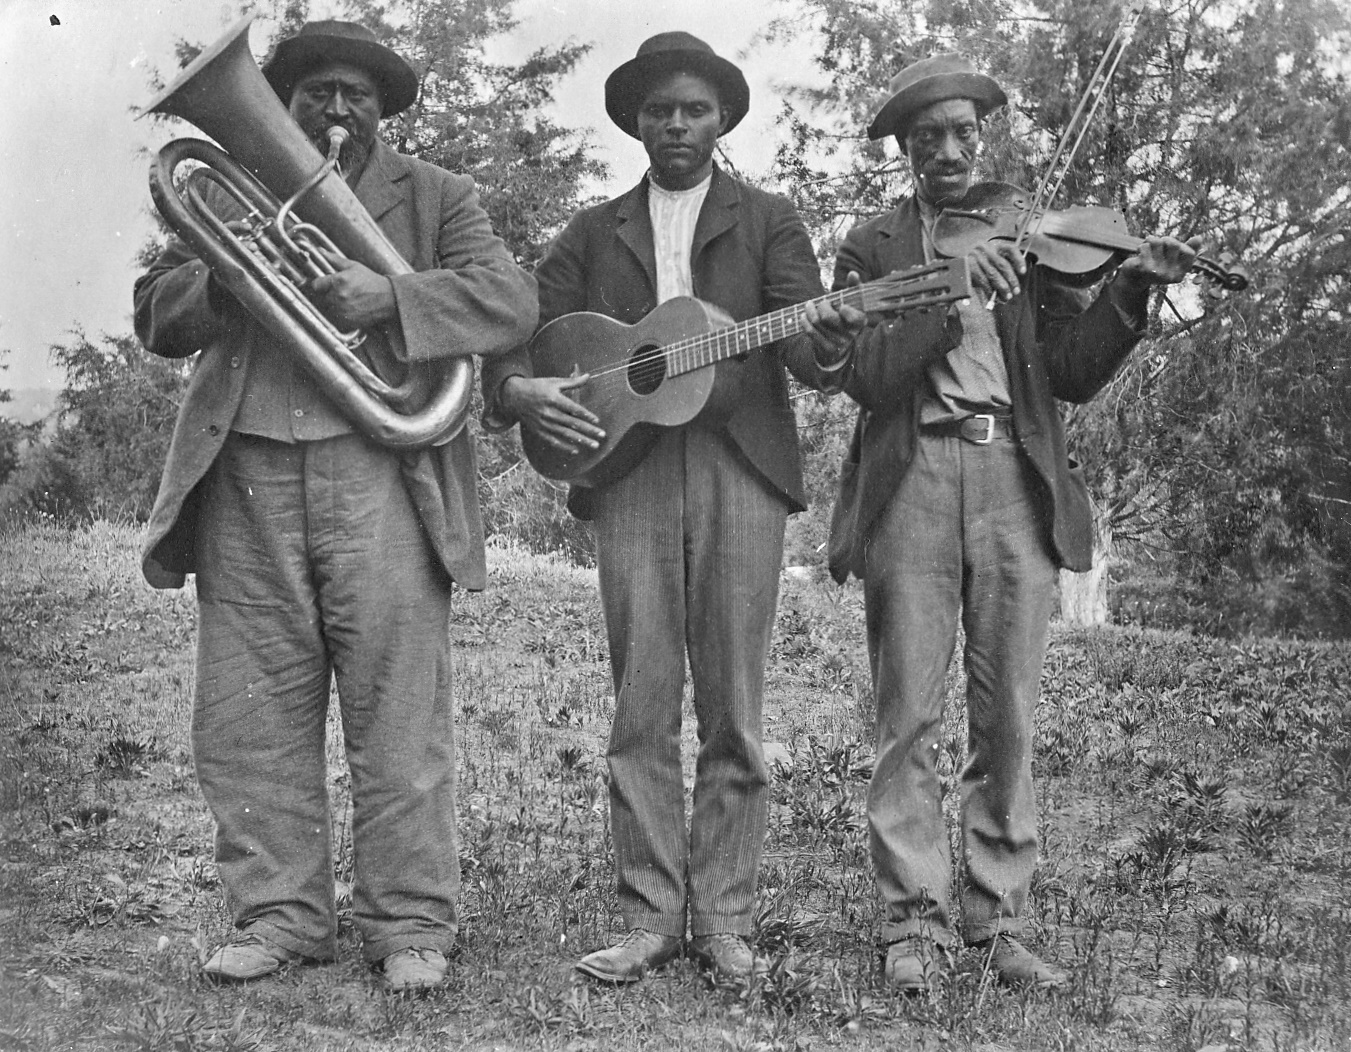 The USA South: Driving to the Origins of Blues Music